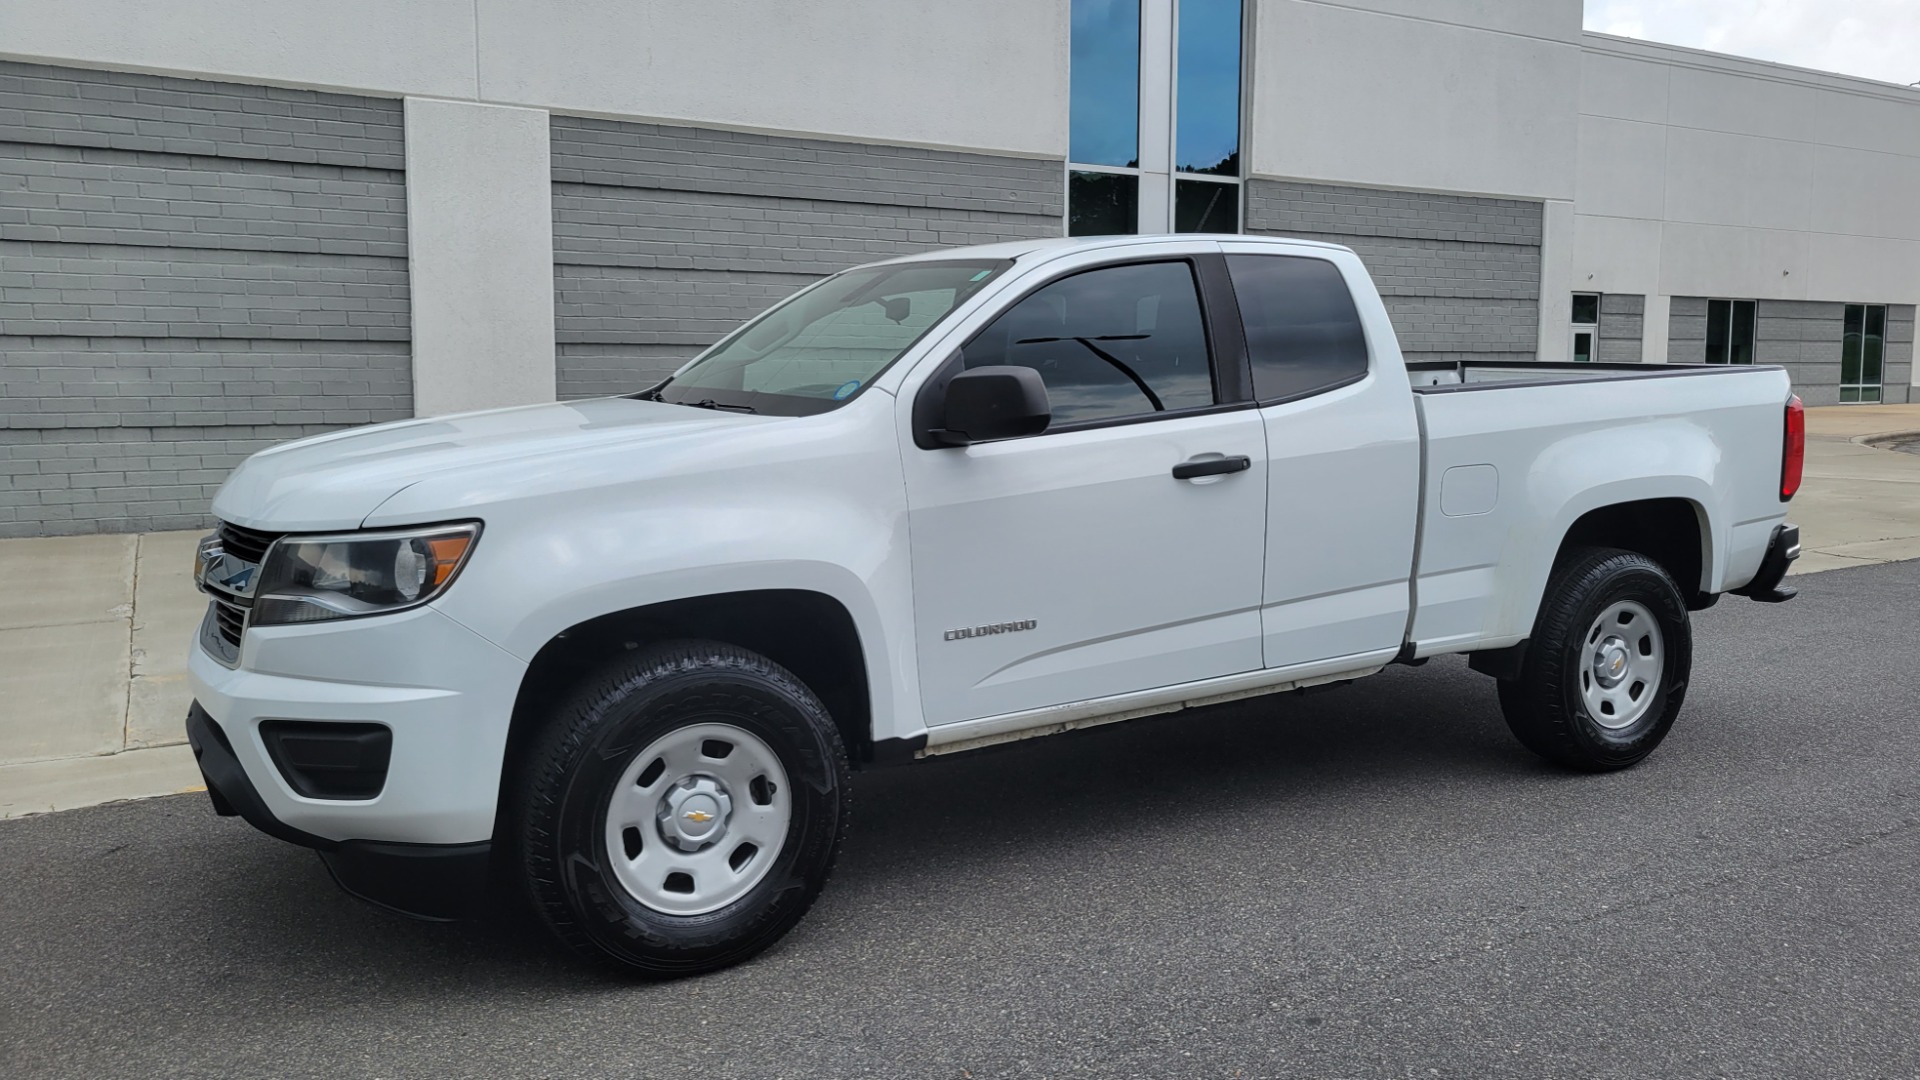 Used 2018 Chevrolet COLORADO EXT CAB / 2.5L / 2WD / 6-SPD AUTO / WORK TRUCK / REARVIEW for sale $22,495 at Formula Imports in Charlotte NC 28227 4